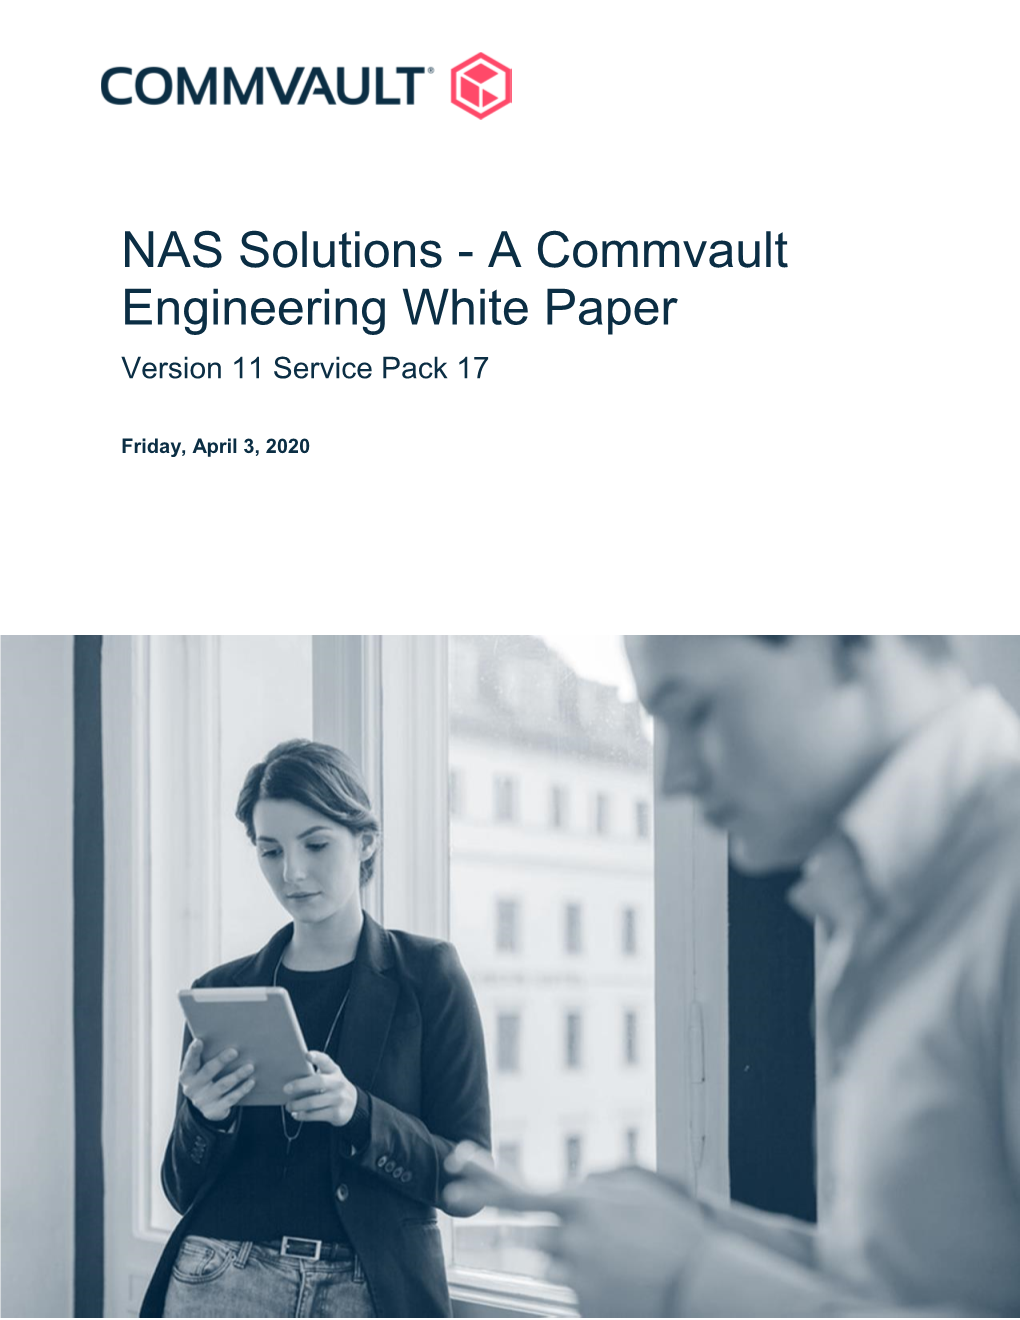 NAS Solutions - a Commvault Engineering White Paper Version 11 Service Pack 17